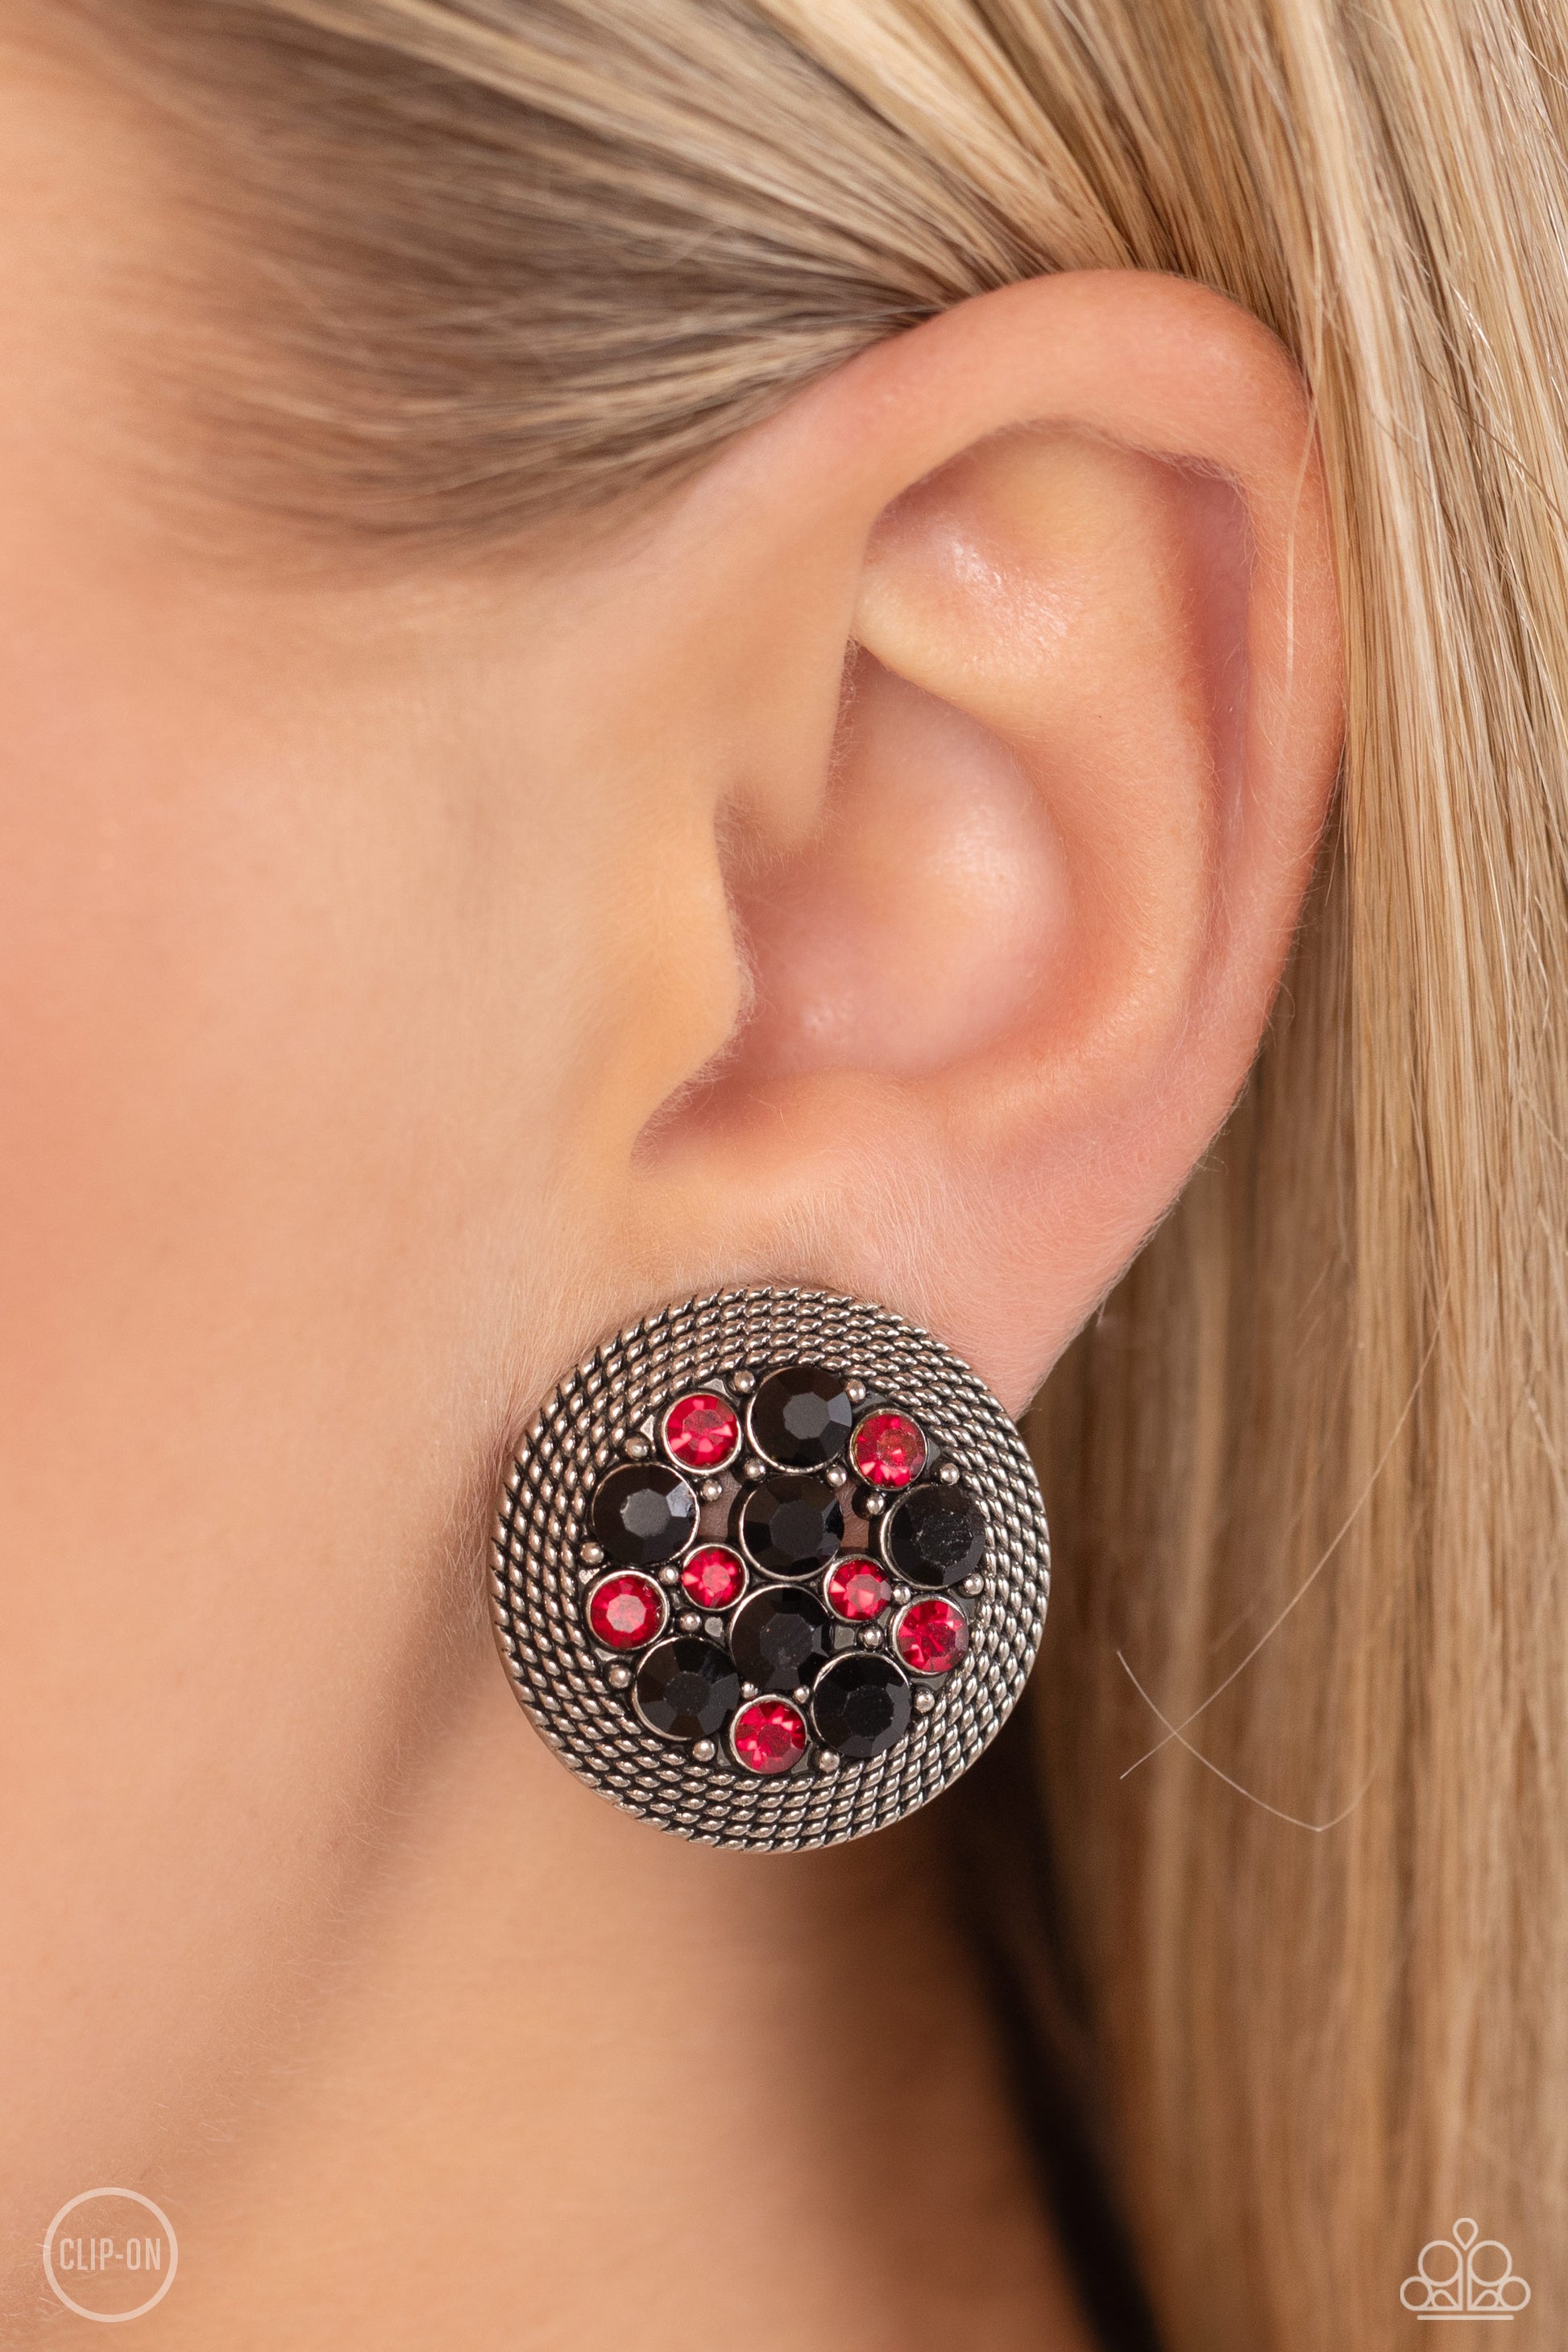 Stellar Status Multi Clip-On Earring - Paparazzi Accessories  A glitzy collection of red and black rhinestones are encircled with a silver rope-like border, resulting in a smoldering centerpiece. Earring attaches to a standard clip-on fitting.  Sold as one pair of clip-on earrings.  P5CO-MTXX-008XX